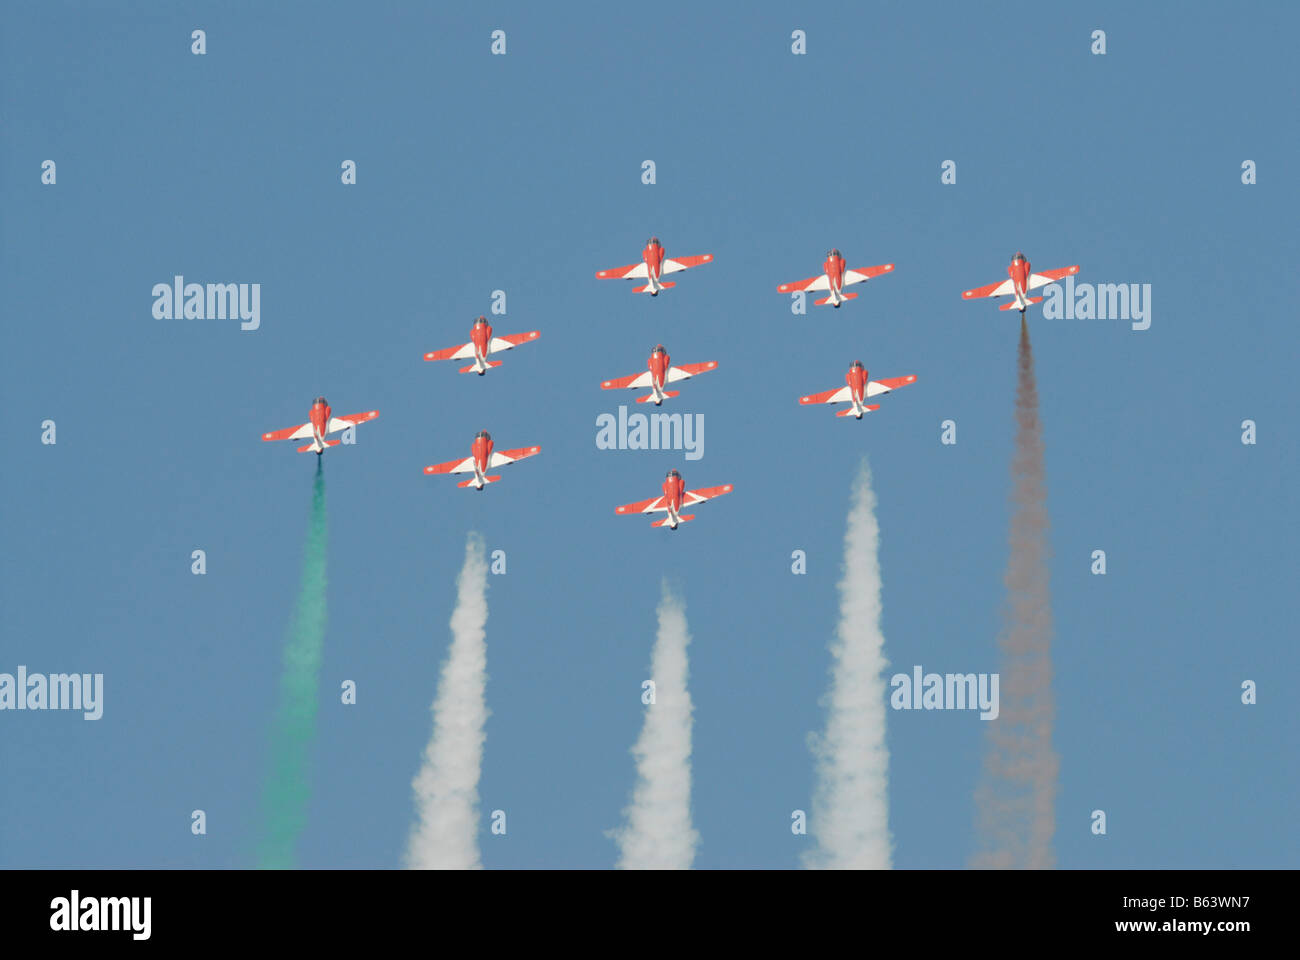 AIR SHOW CONDUCTED BY INDIAN AIR FORCE IN TRIVANDRUM, KERALA Stock